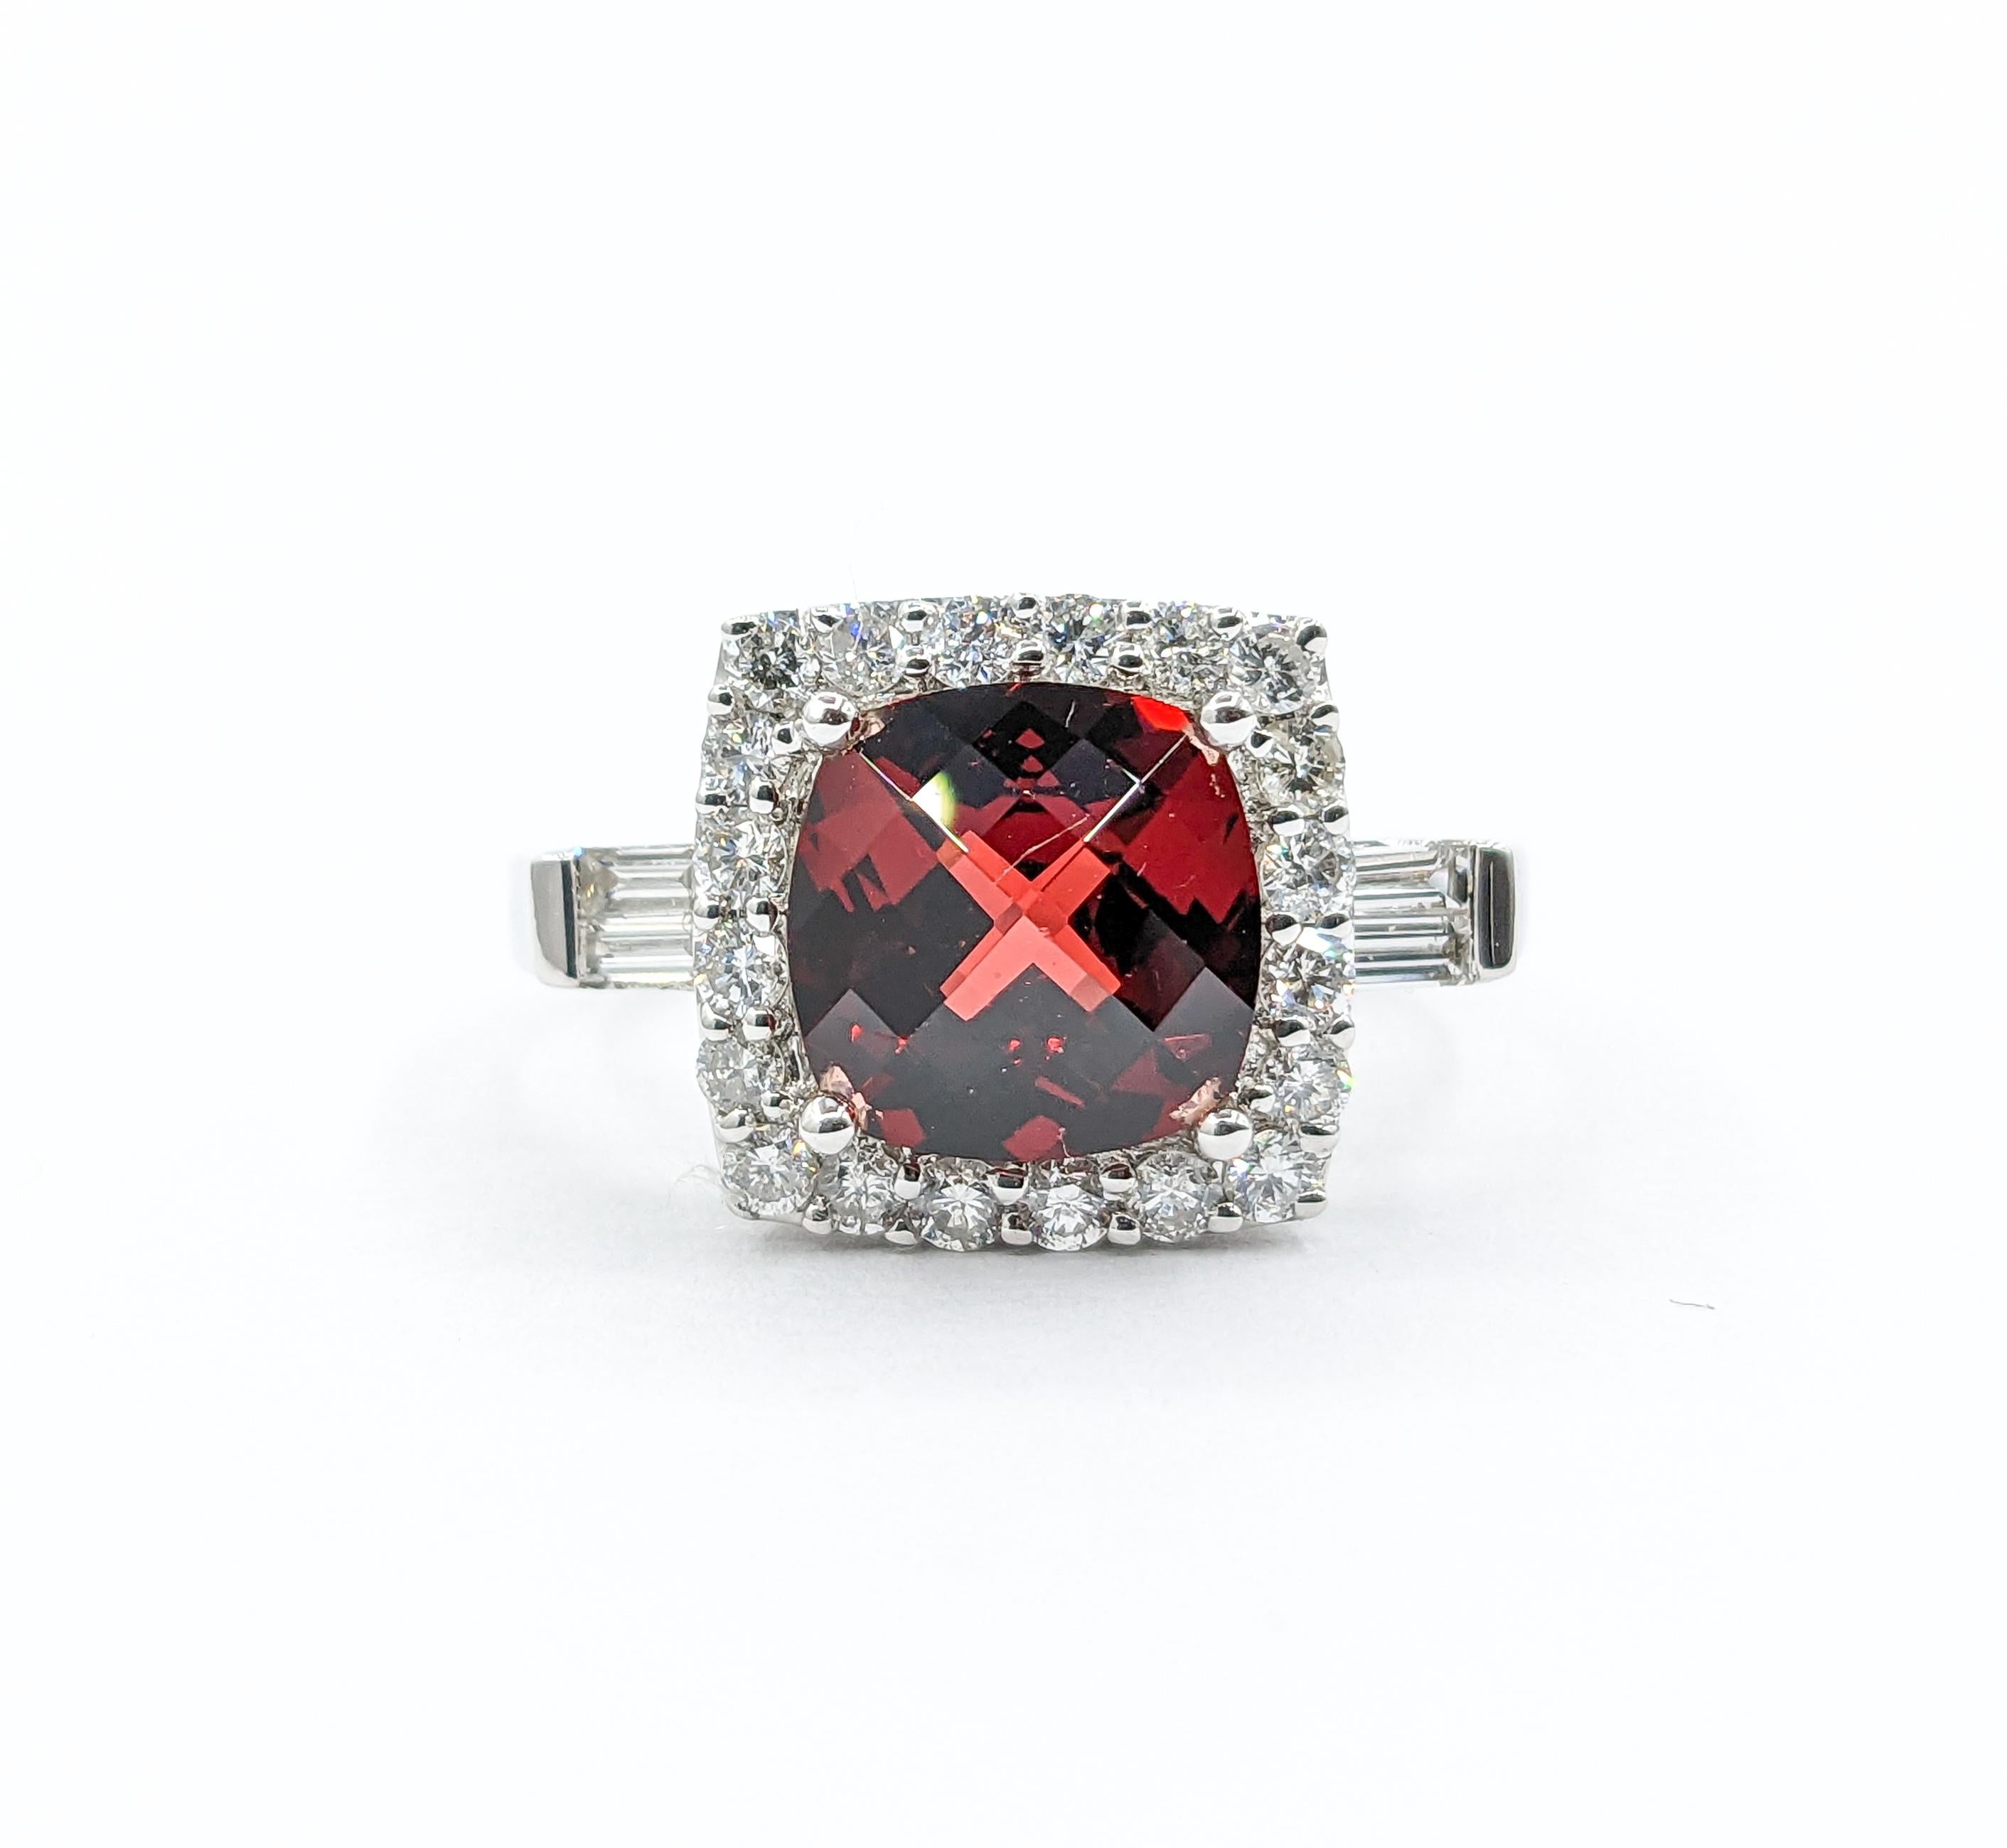 Vibrant Garnet & Diamond Cocktail Ring in 18k White Gold In Excellent Condition For Sale In Bloomington, MN